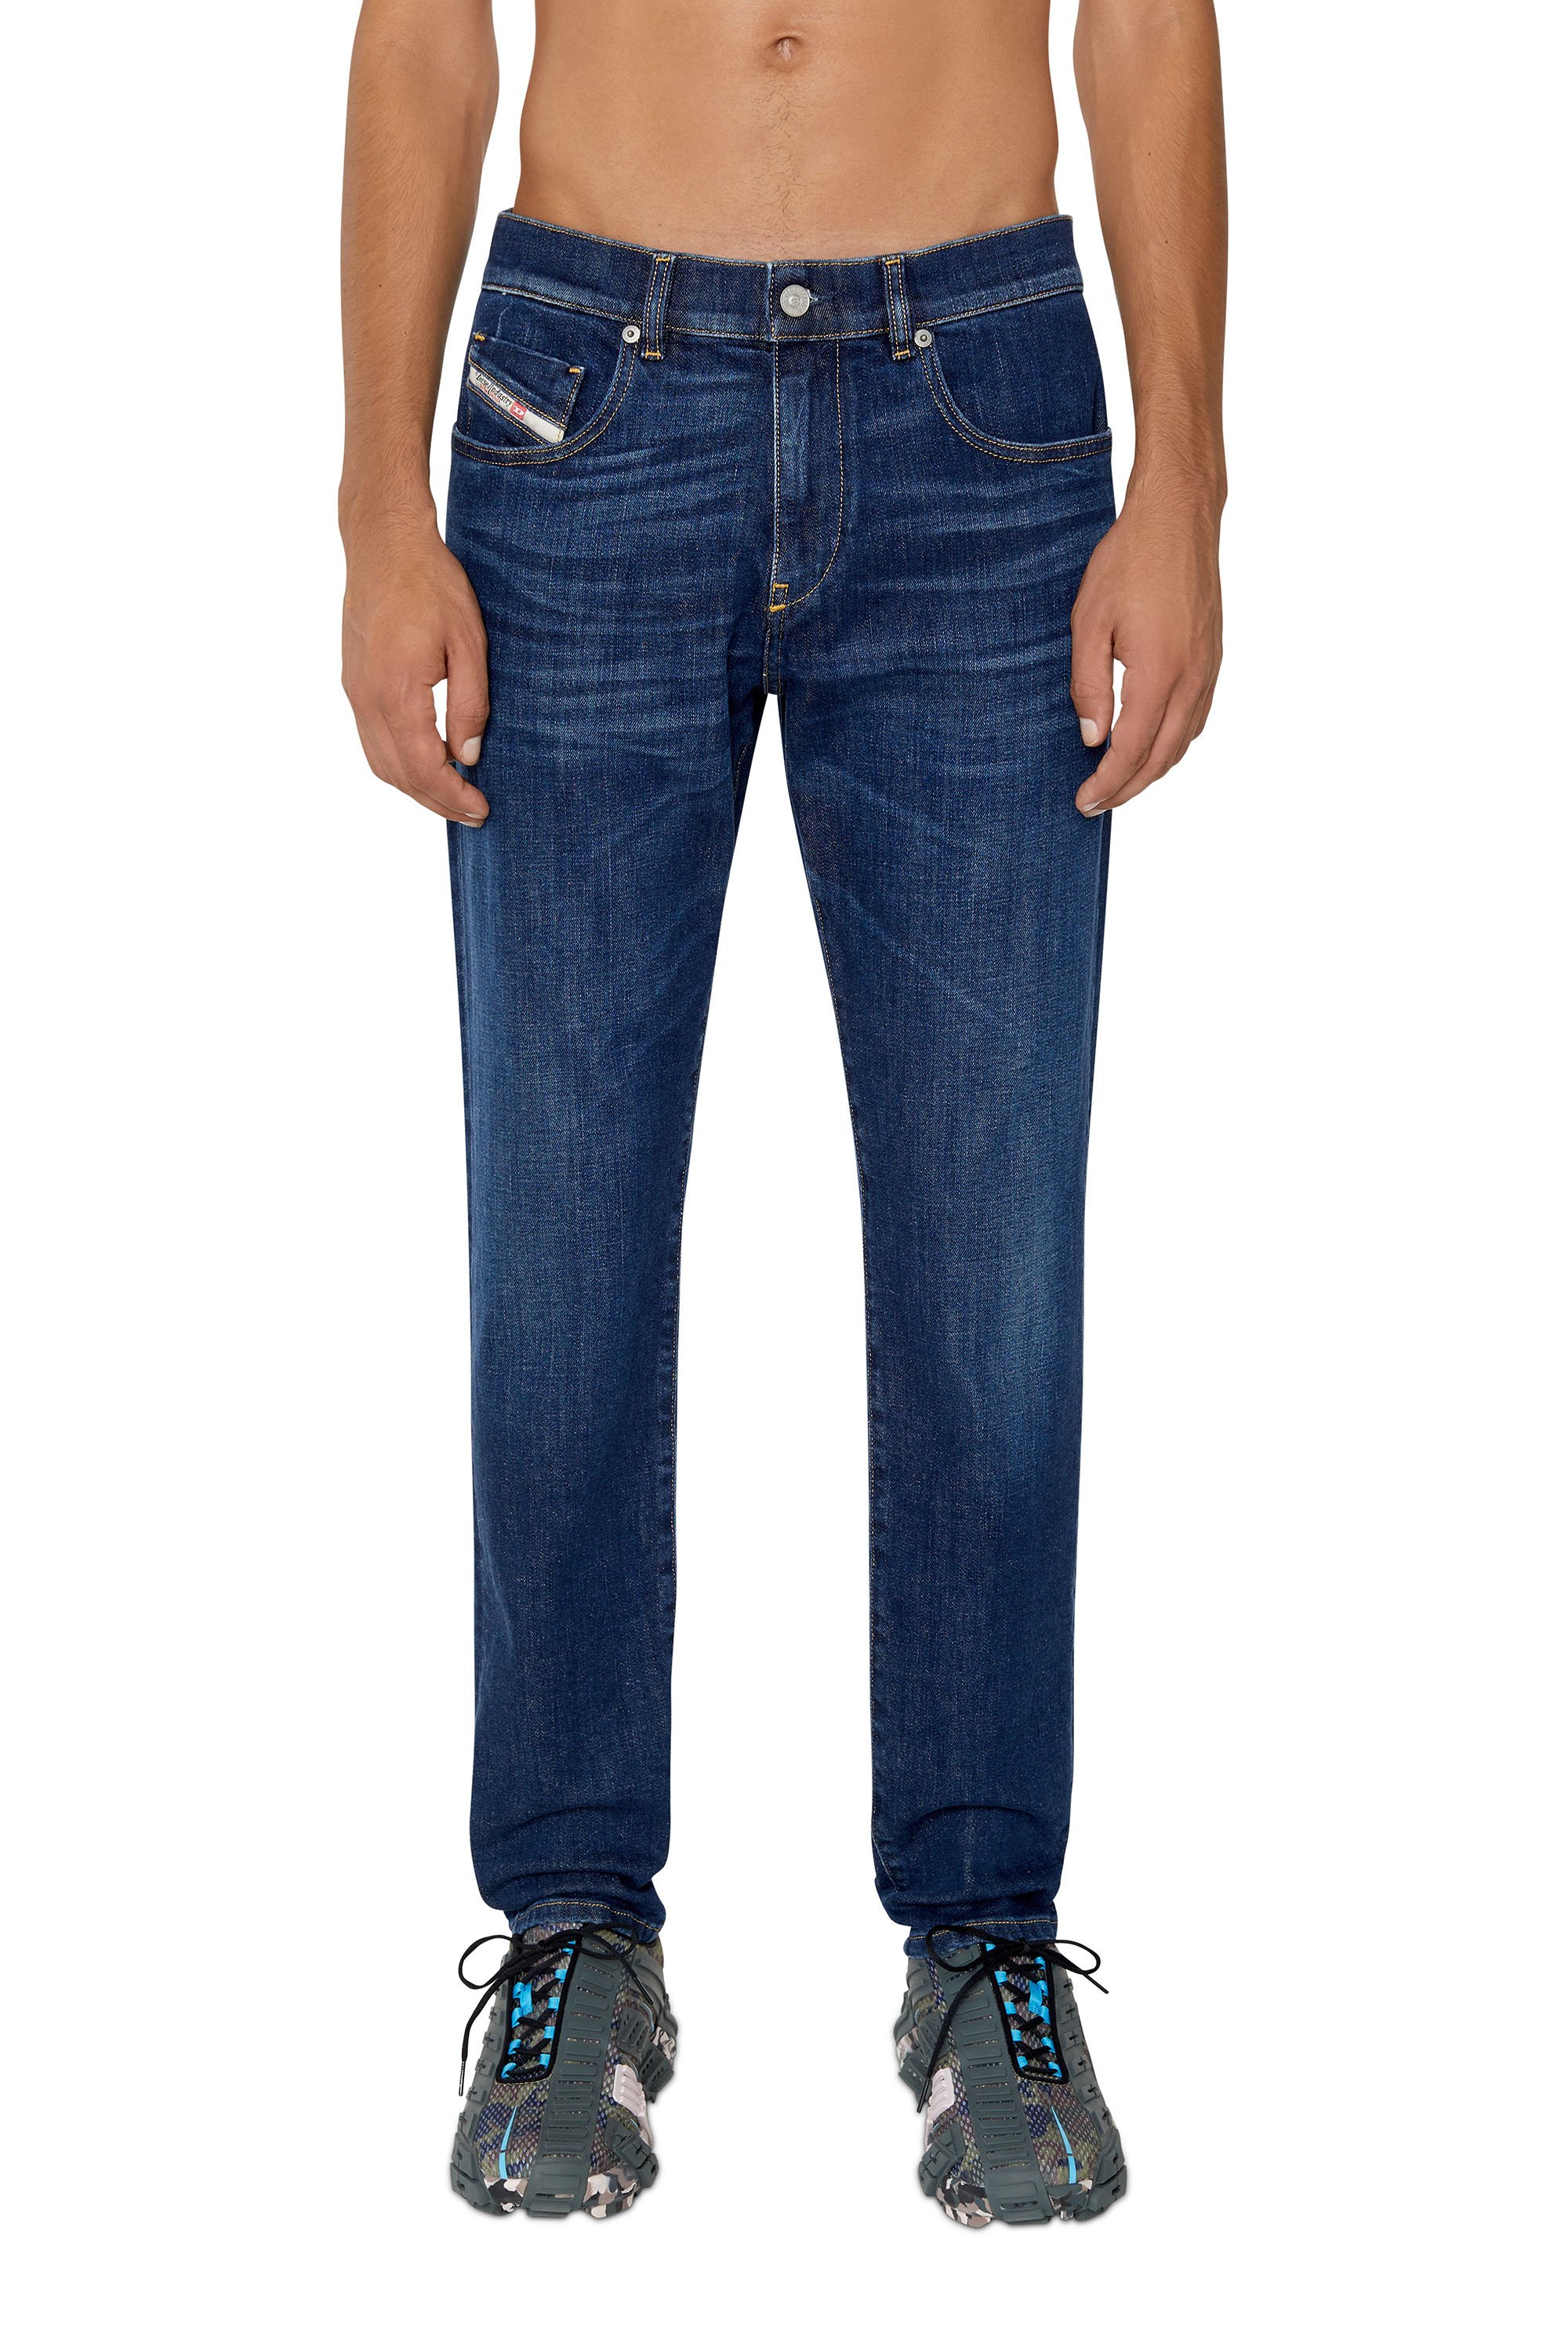 Jeans stock for mens. Mens jeans Available Now | Mens jeans, Fashion, Levi  jeans